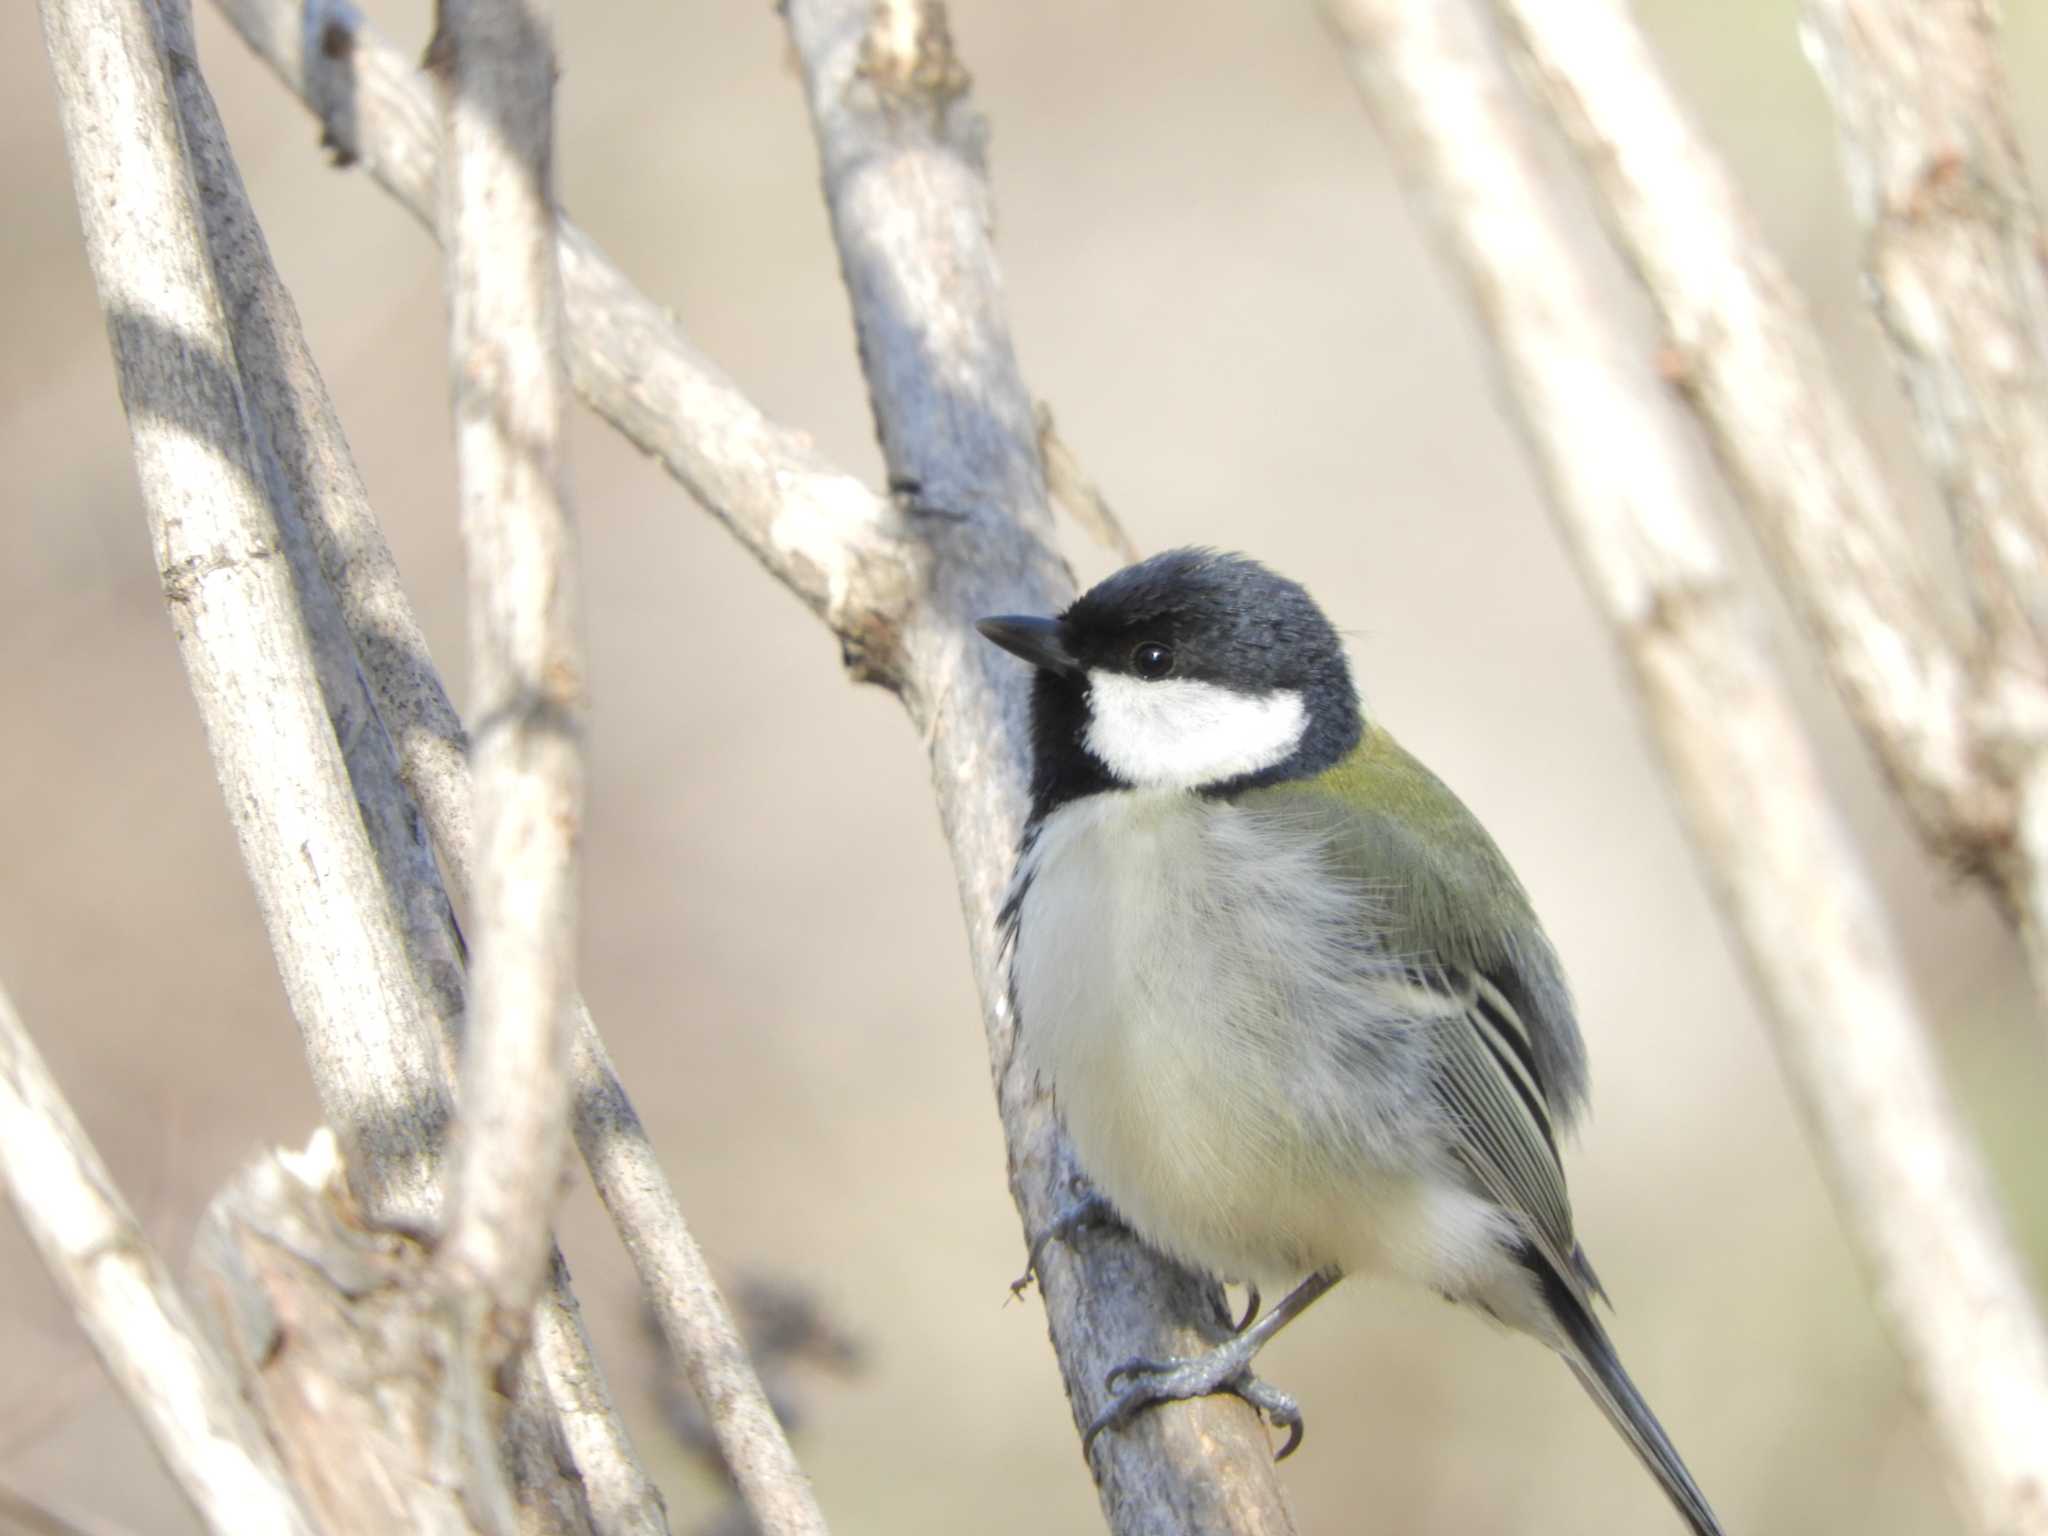 Photo of Japanese Tit at Imperial Palace by maru